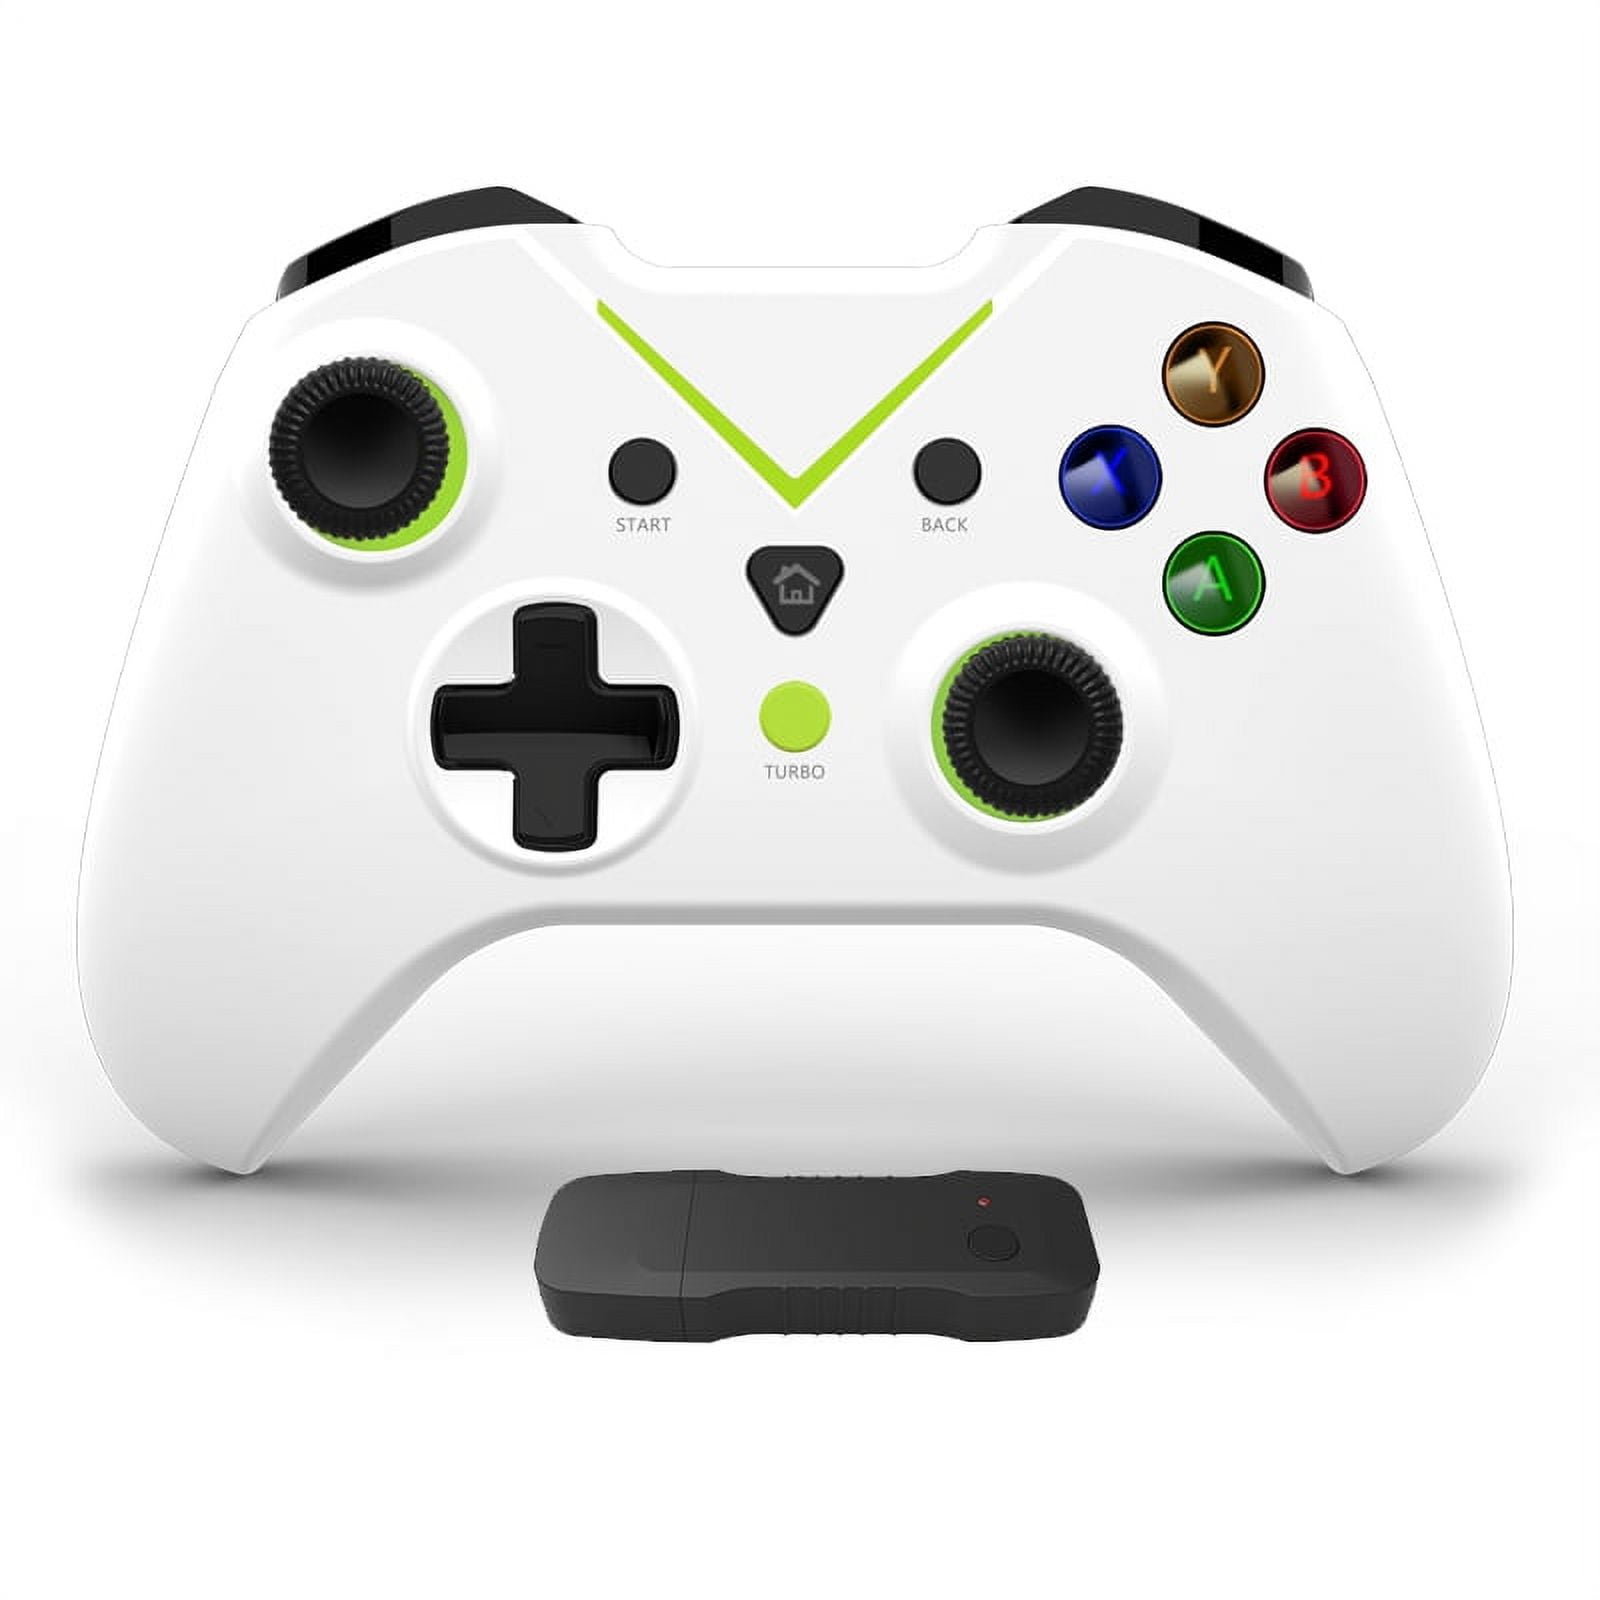 Pair Your Xbox Controller to PC Effortlessly